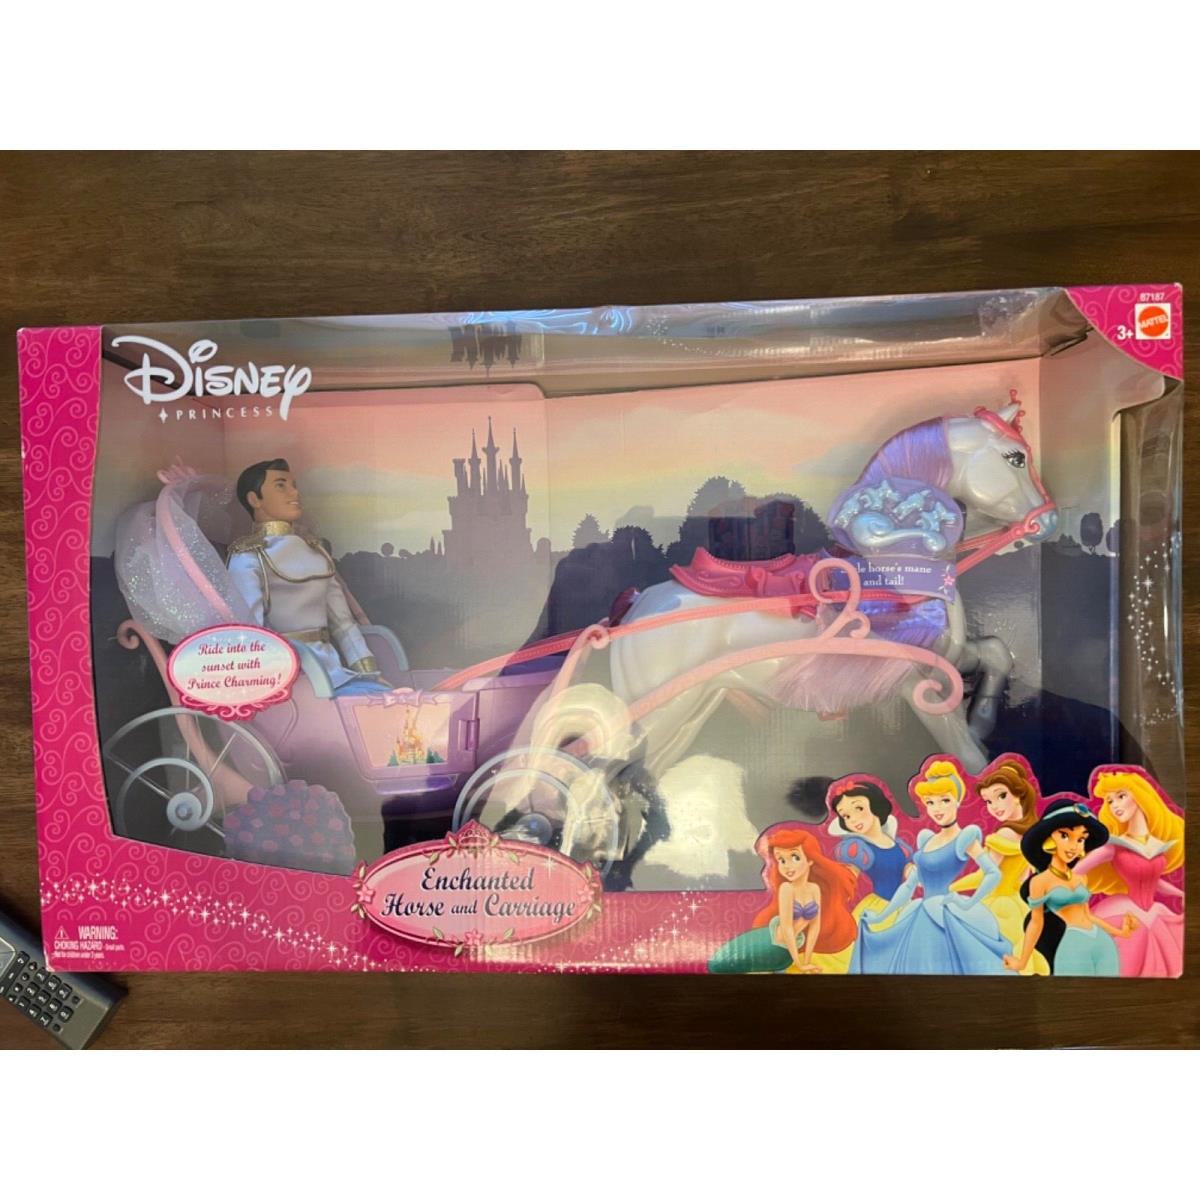 Disney Prince and Enchanted Horse and Carriage Set Barbie Mattel